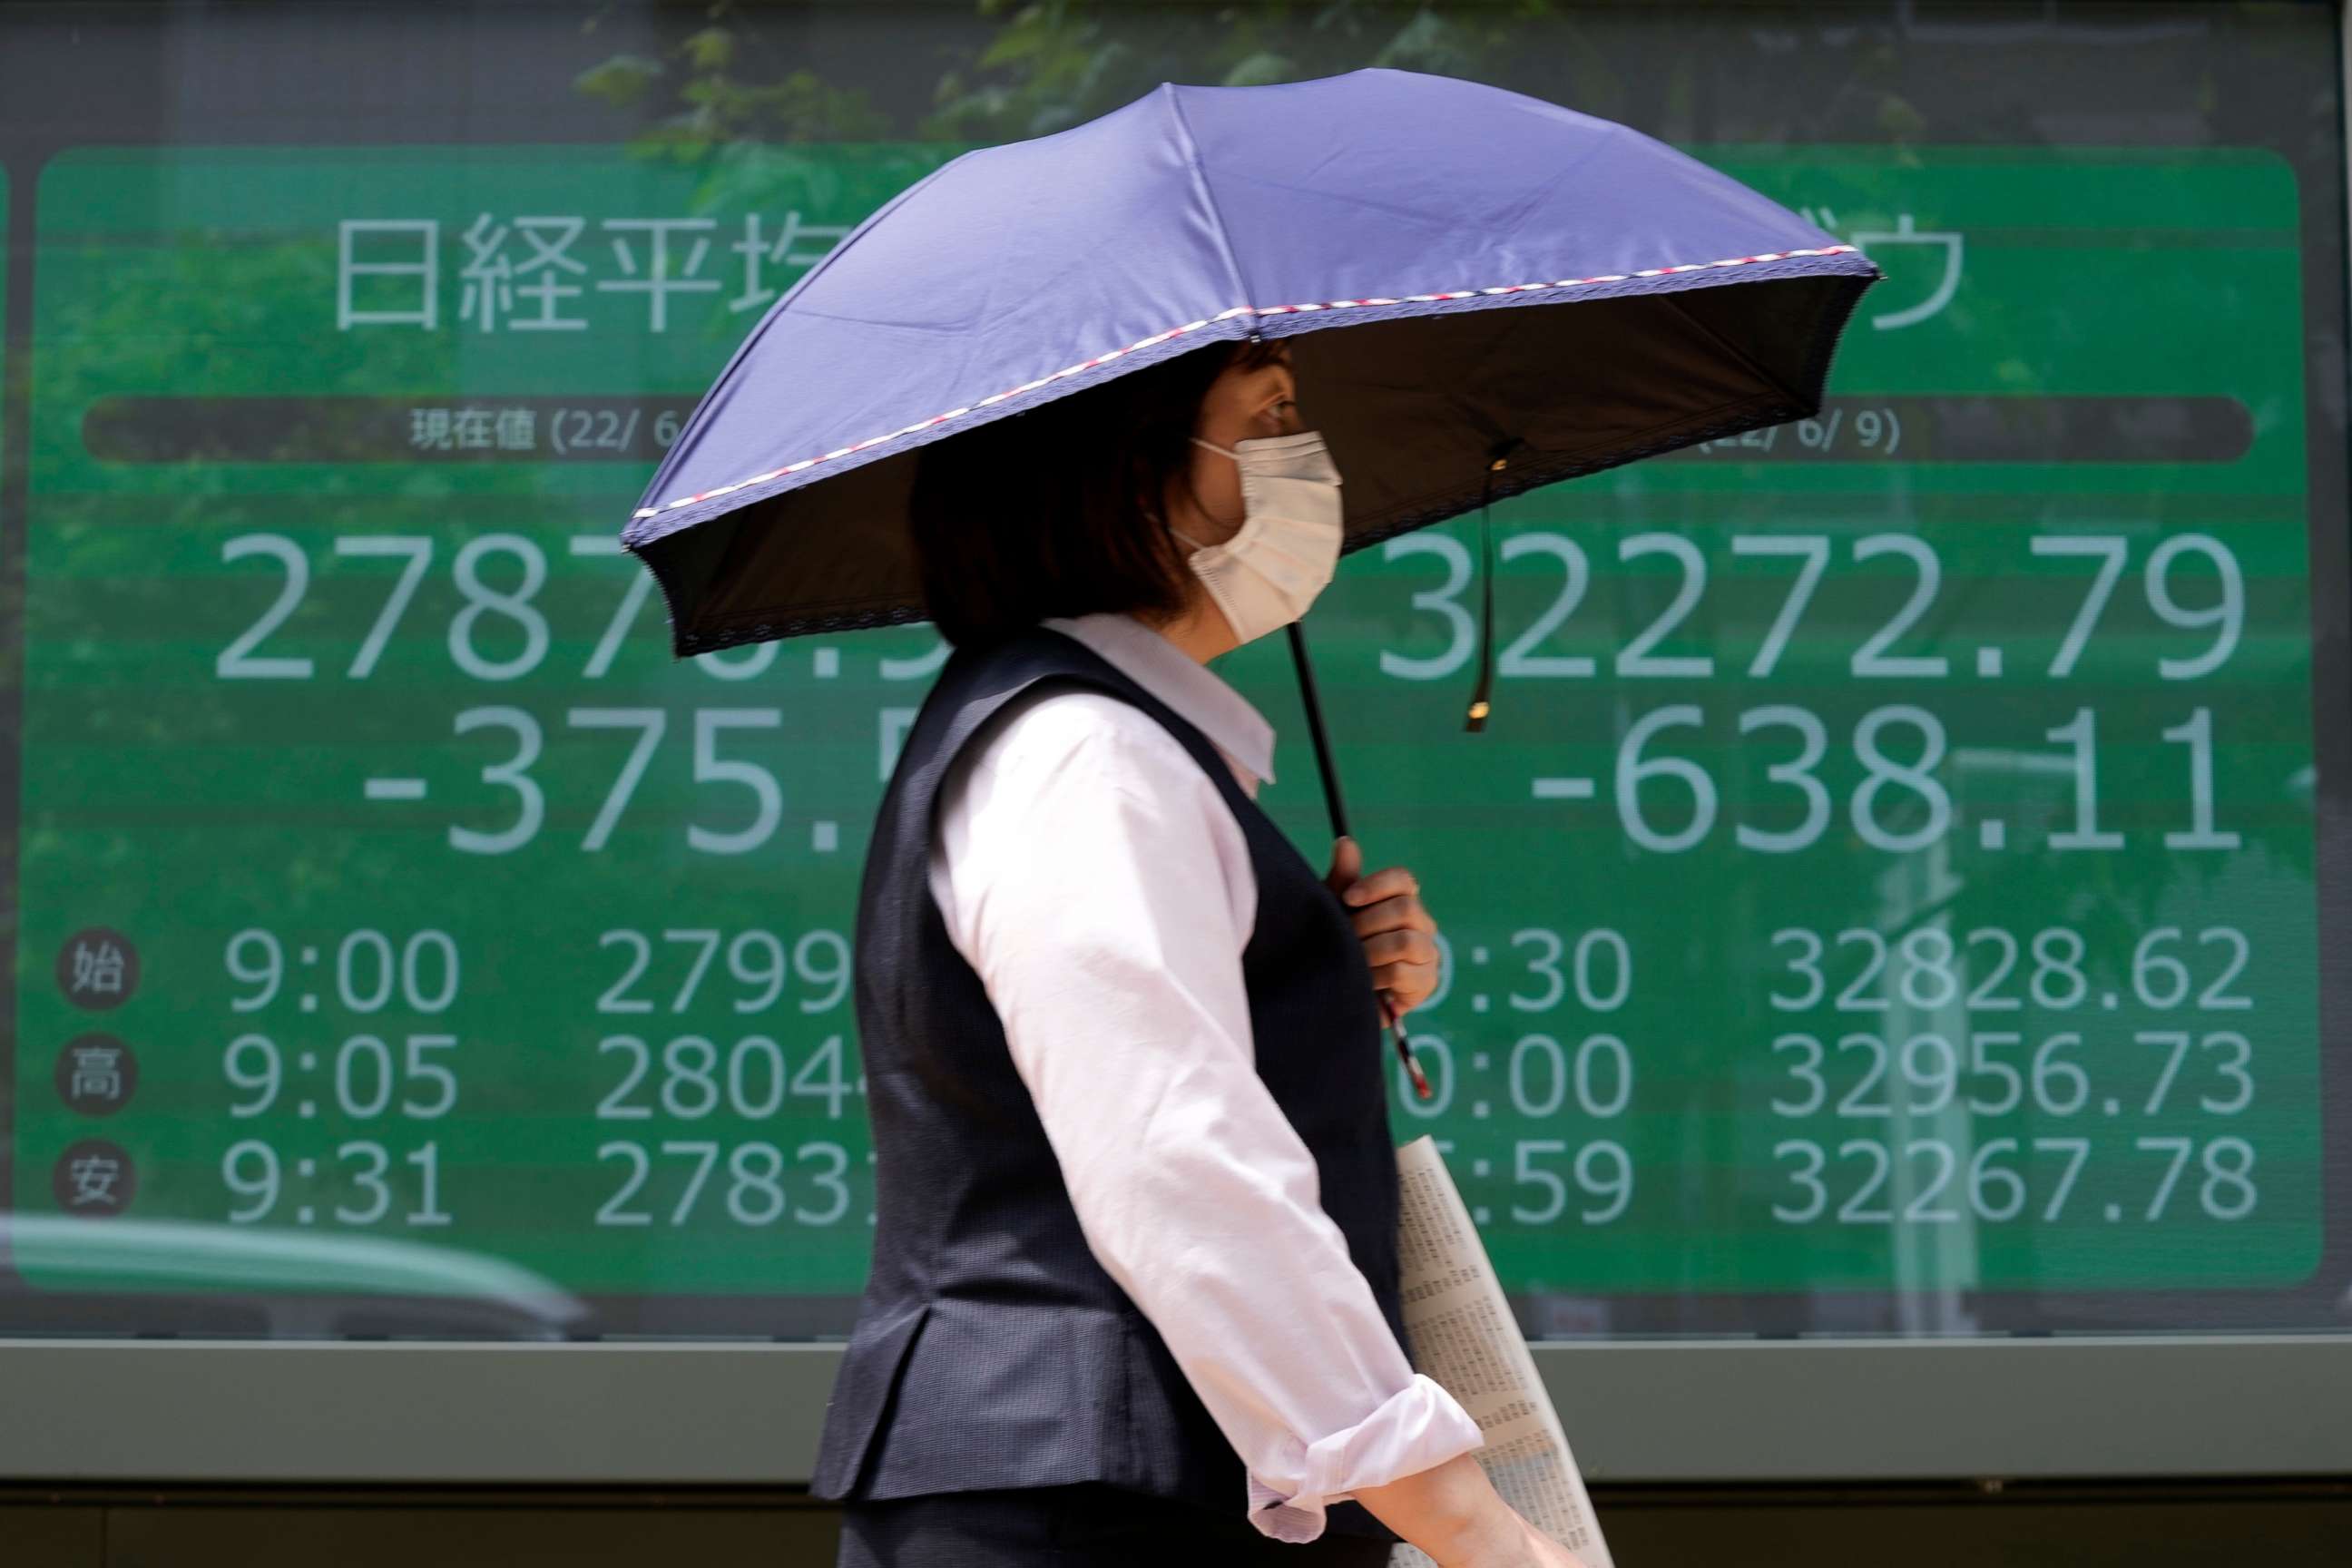 PHOTO: A woman wearing a protective mask in front of an electronic stock board showing Japan's Nikkei 225 and New York Dow indexes at a securities firm Friday, June 10, 2022, in Tokyo.